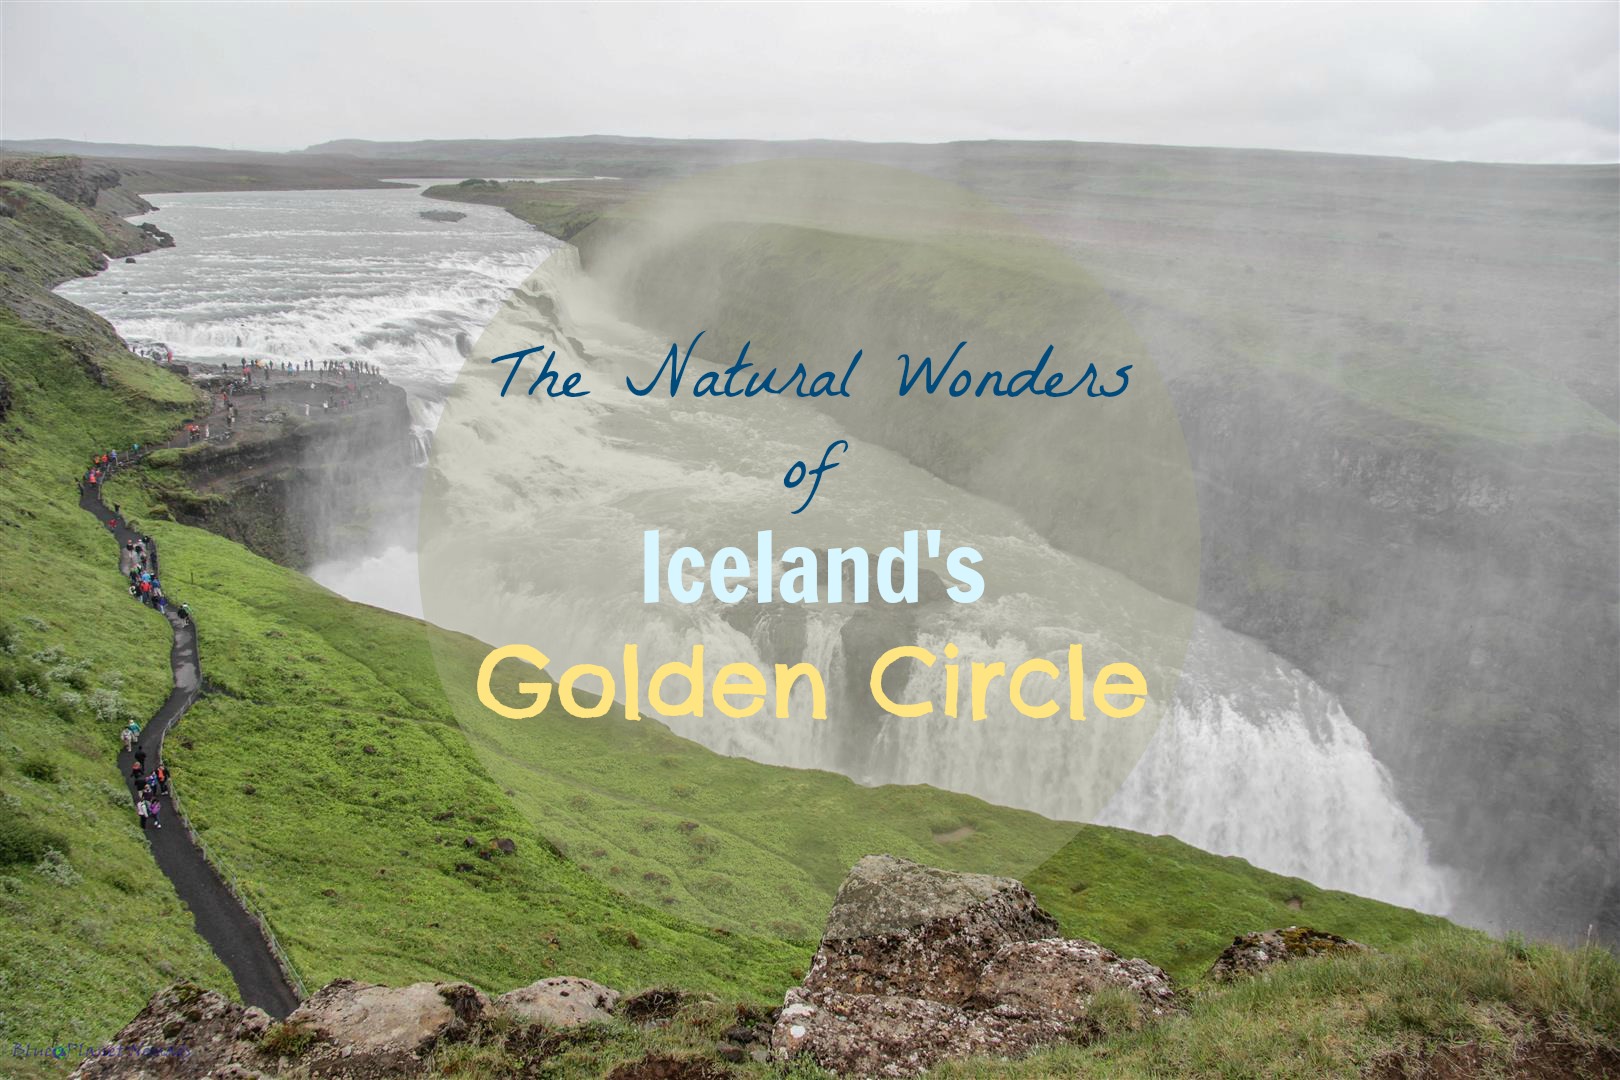 The Natural Wonders of Iceland’s Golden Circle